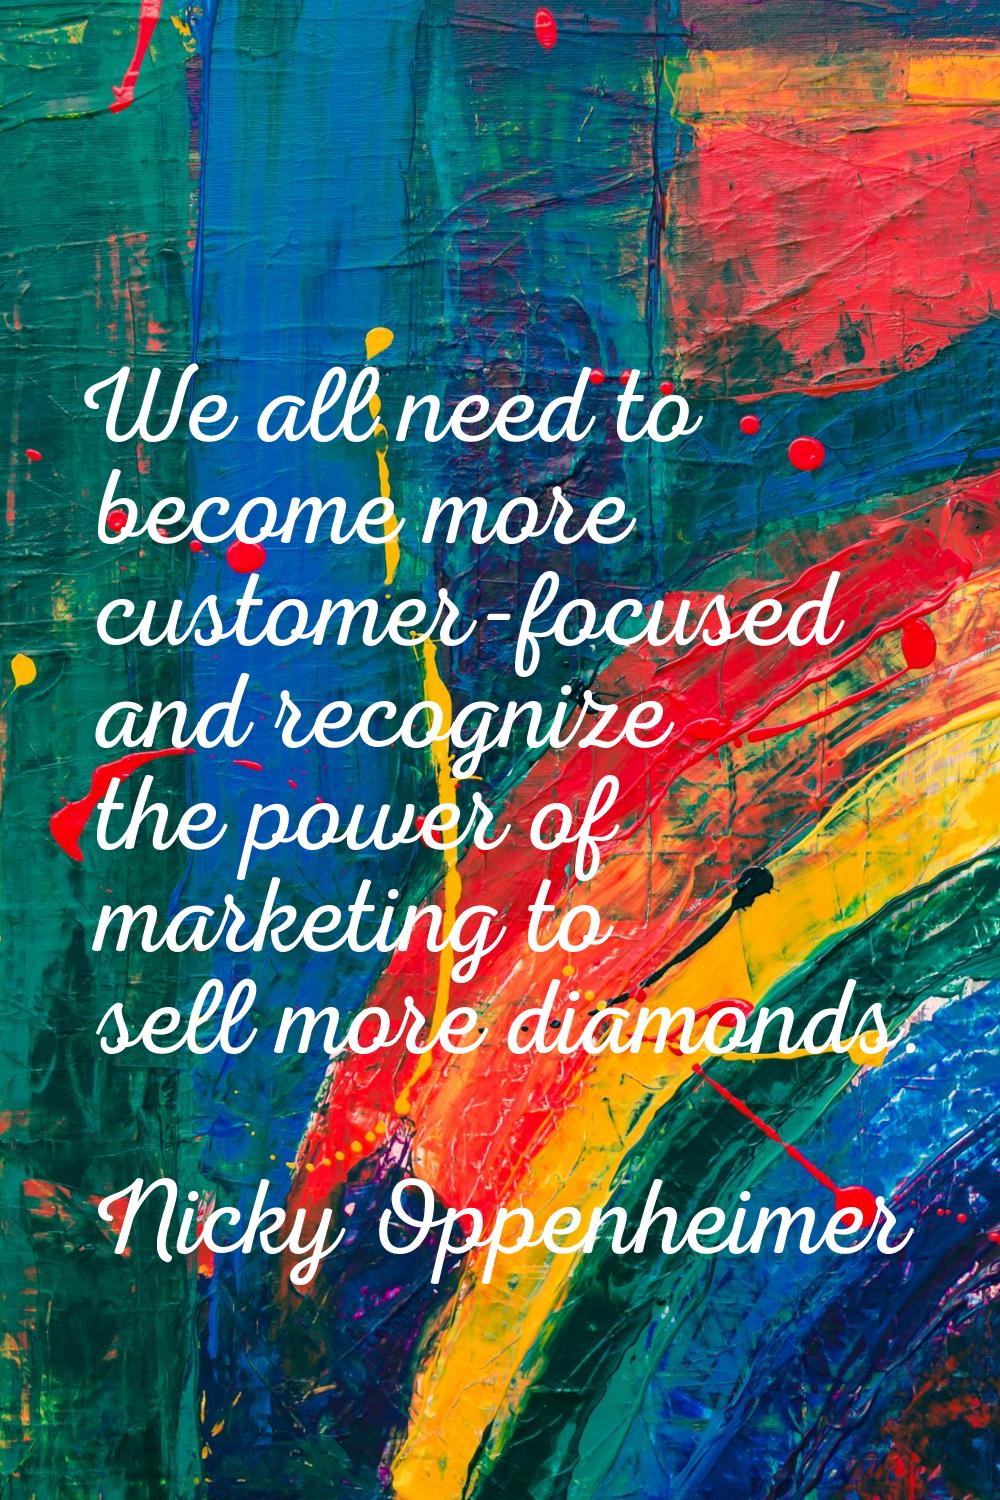 We all need to become more customer-focused and recognize the power of marketing to sell more diamo